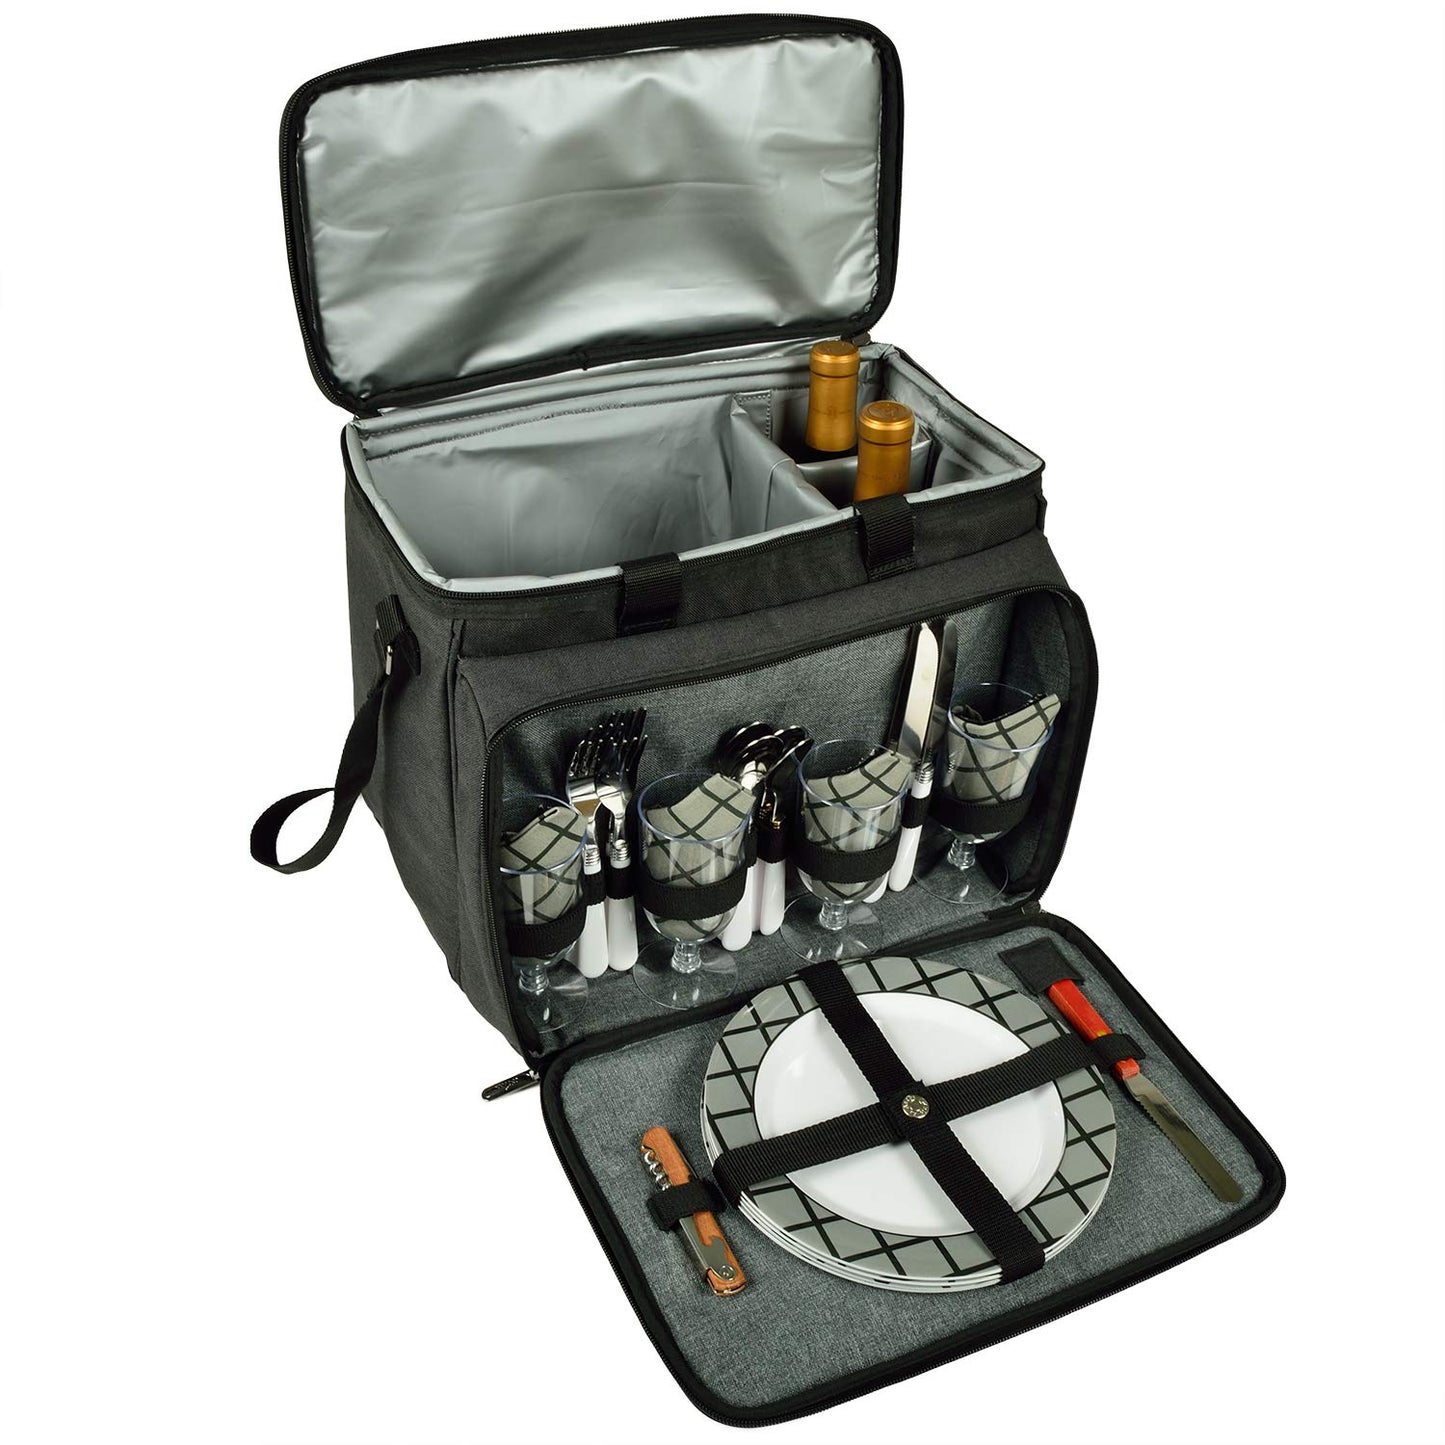 Picnic at Ascot Original Insulated Picnic Cooler with Service for 4 -Designed & Assembled in The USA